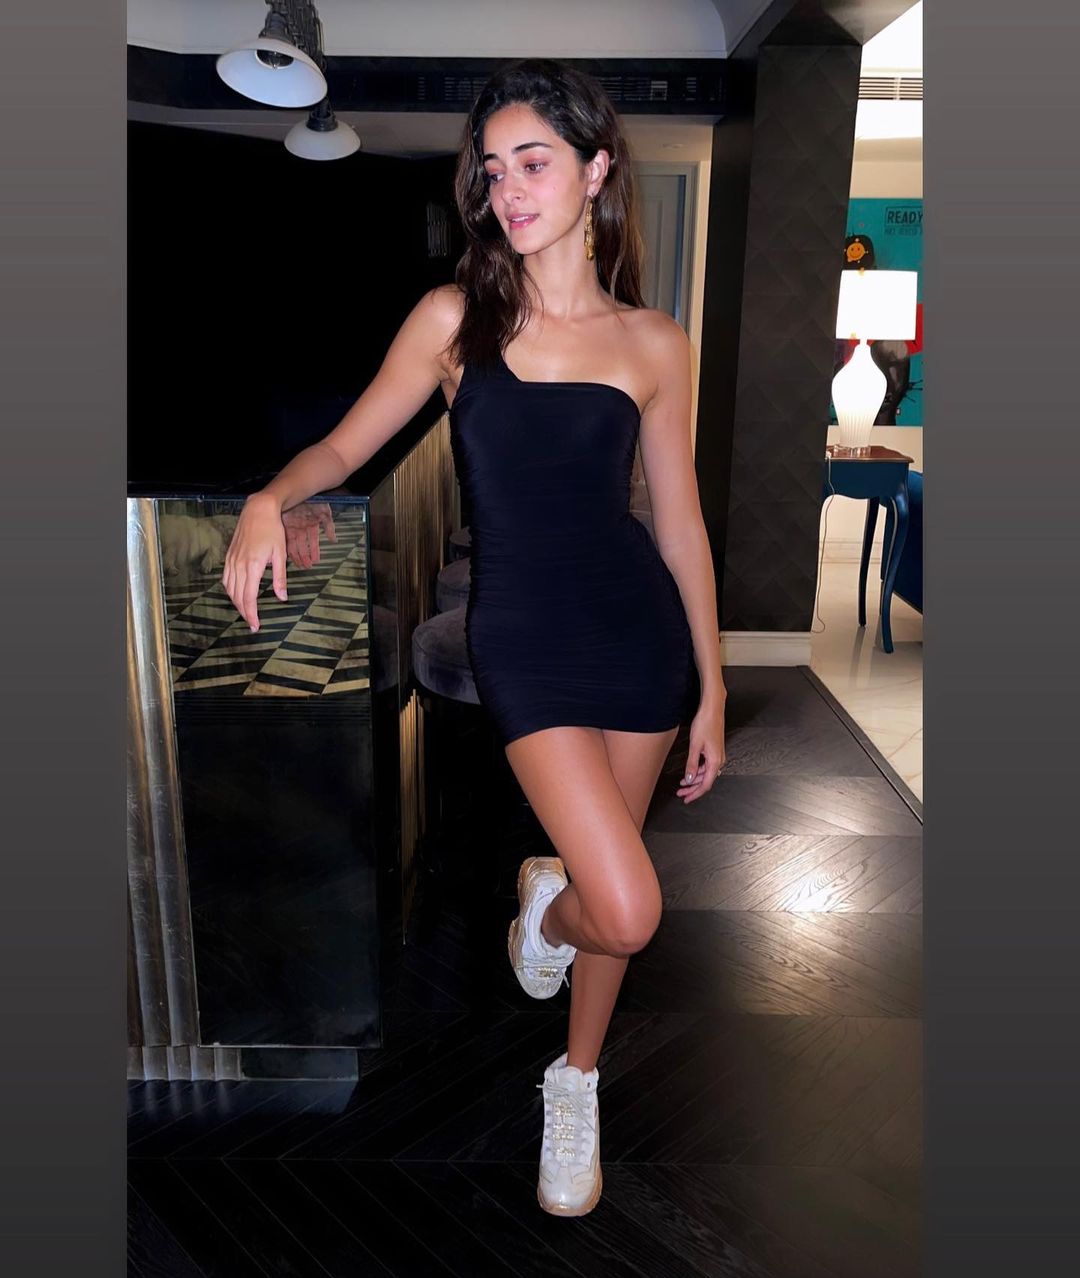  Ananya Panday flaunts her toned figure in the bodycon dress. (Image: Instagram)